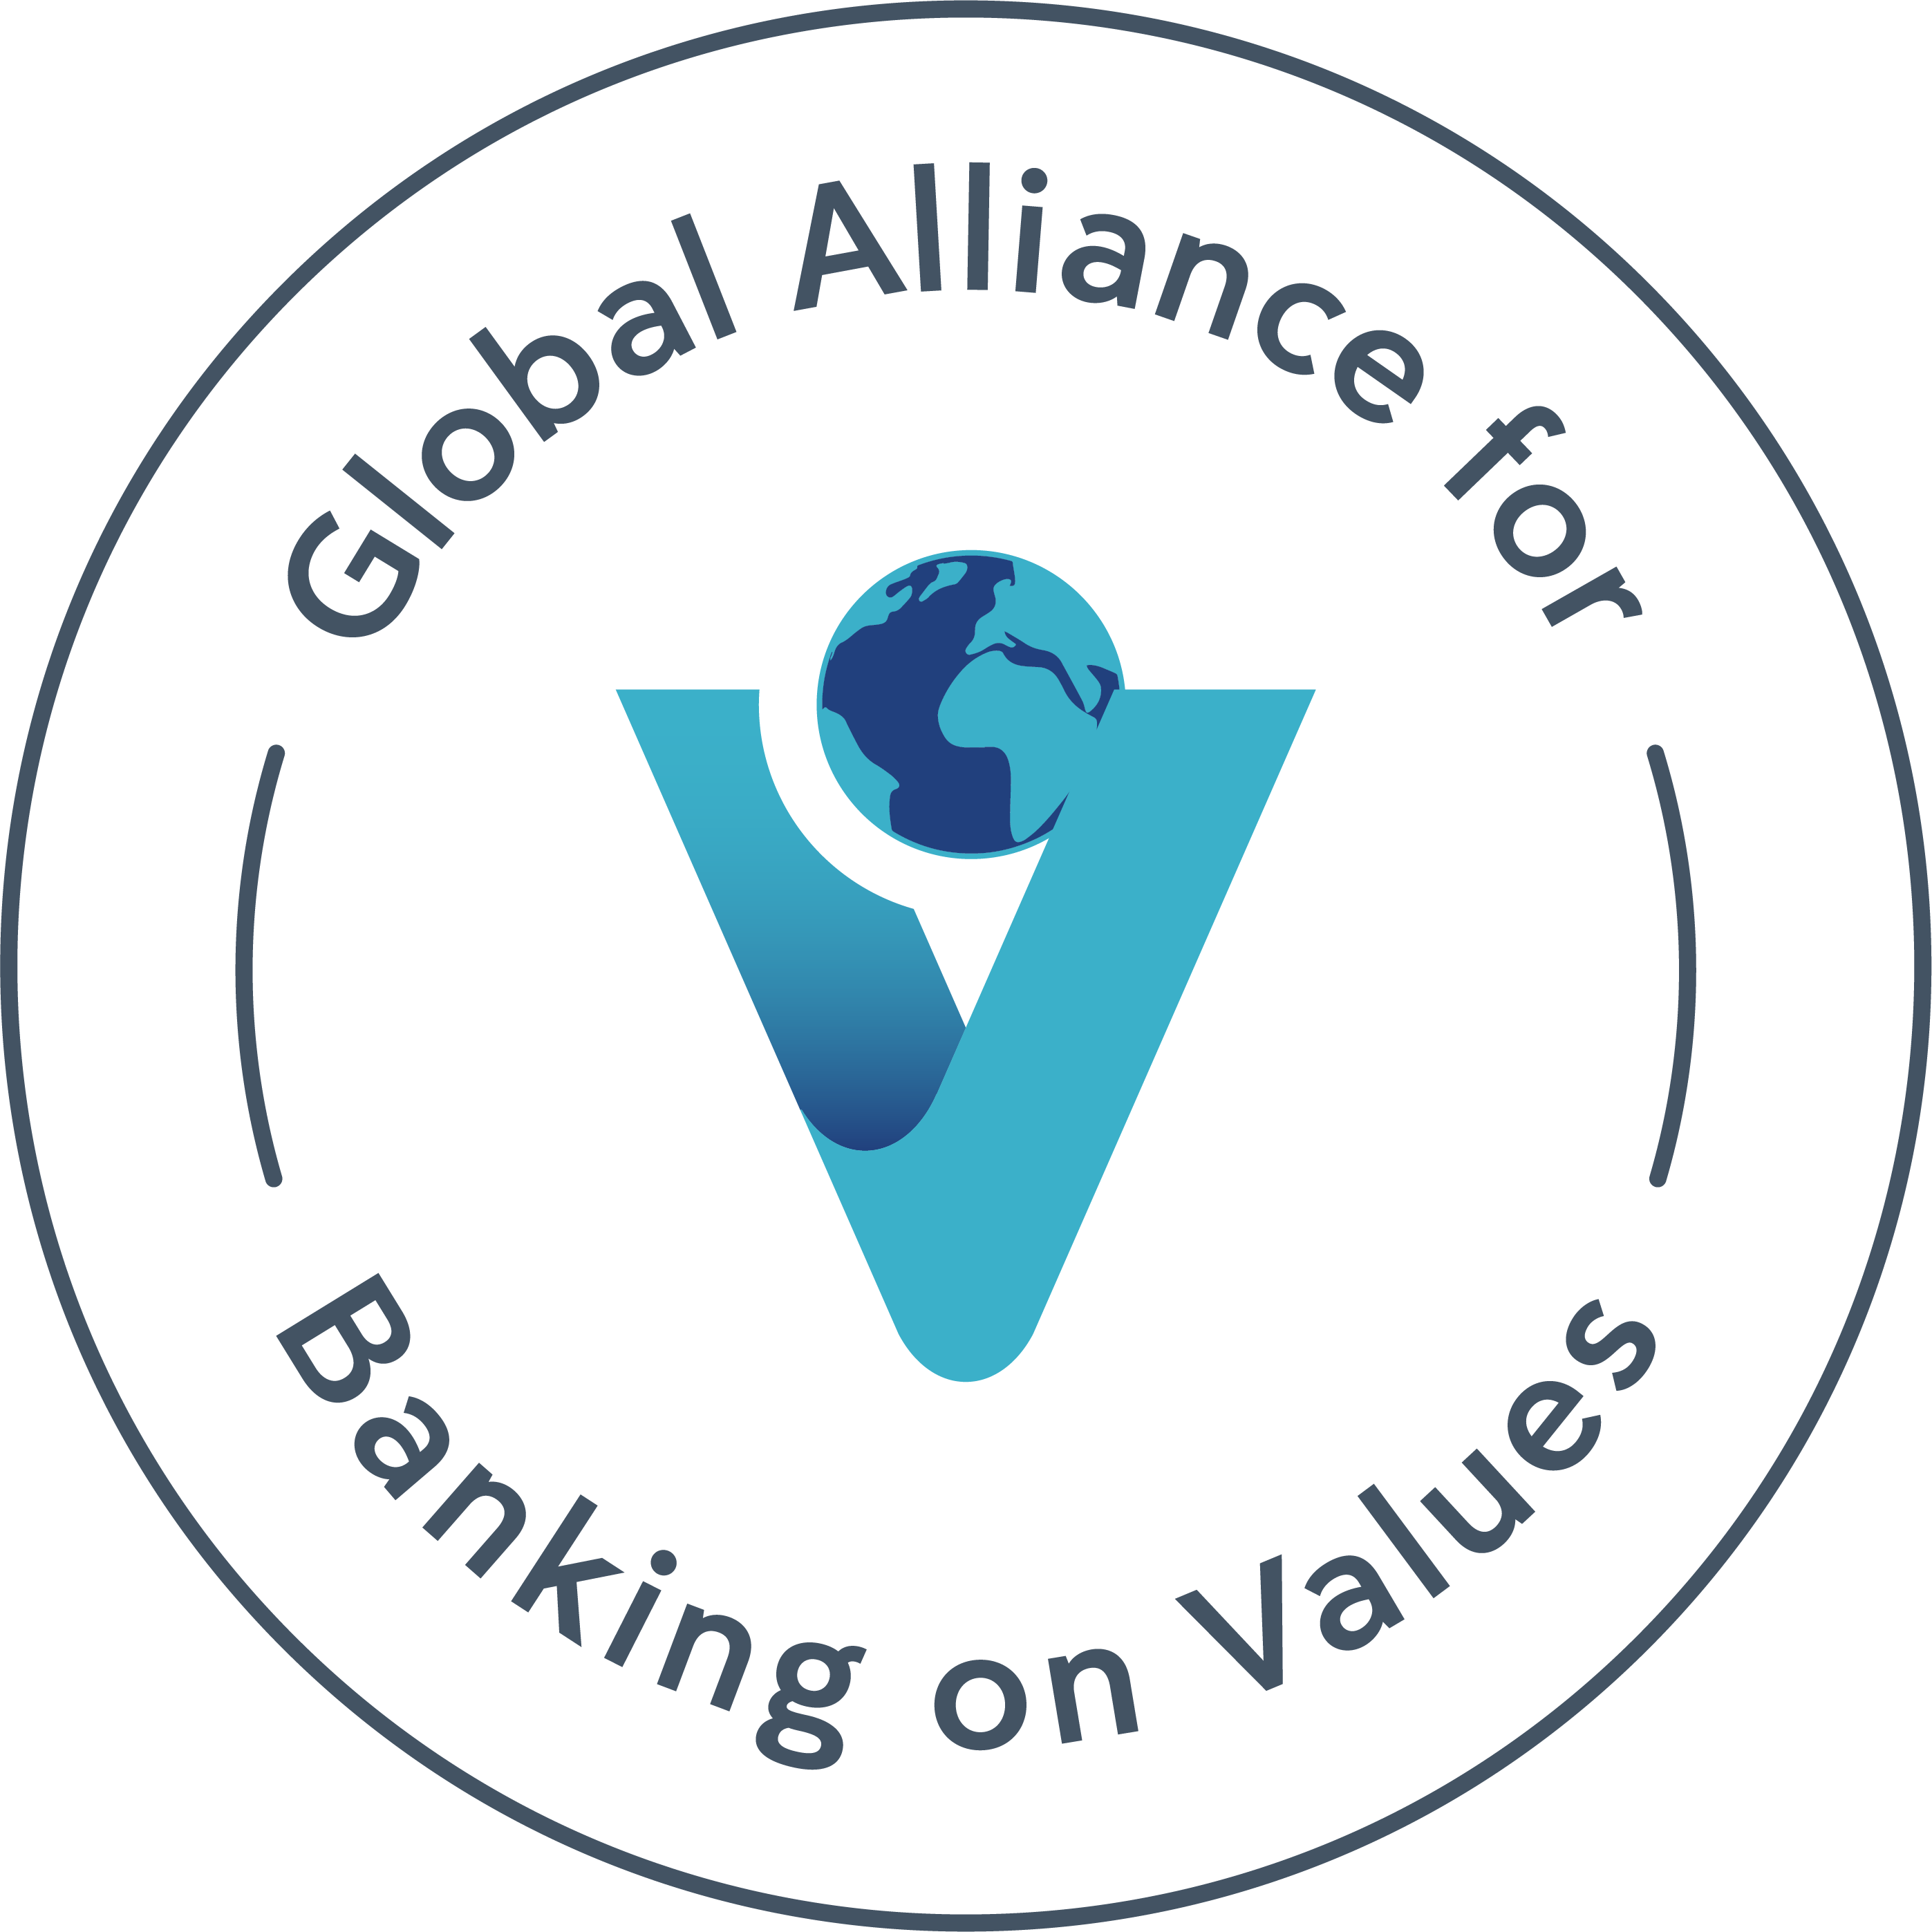 Global Alliance for Banking on Values decorative logo